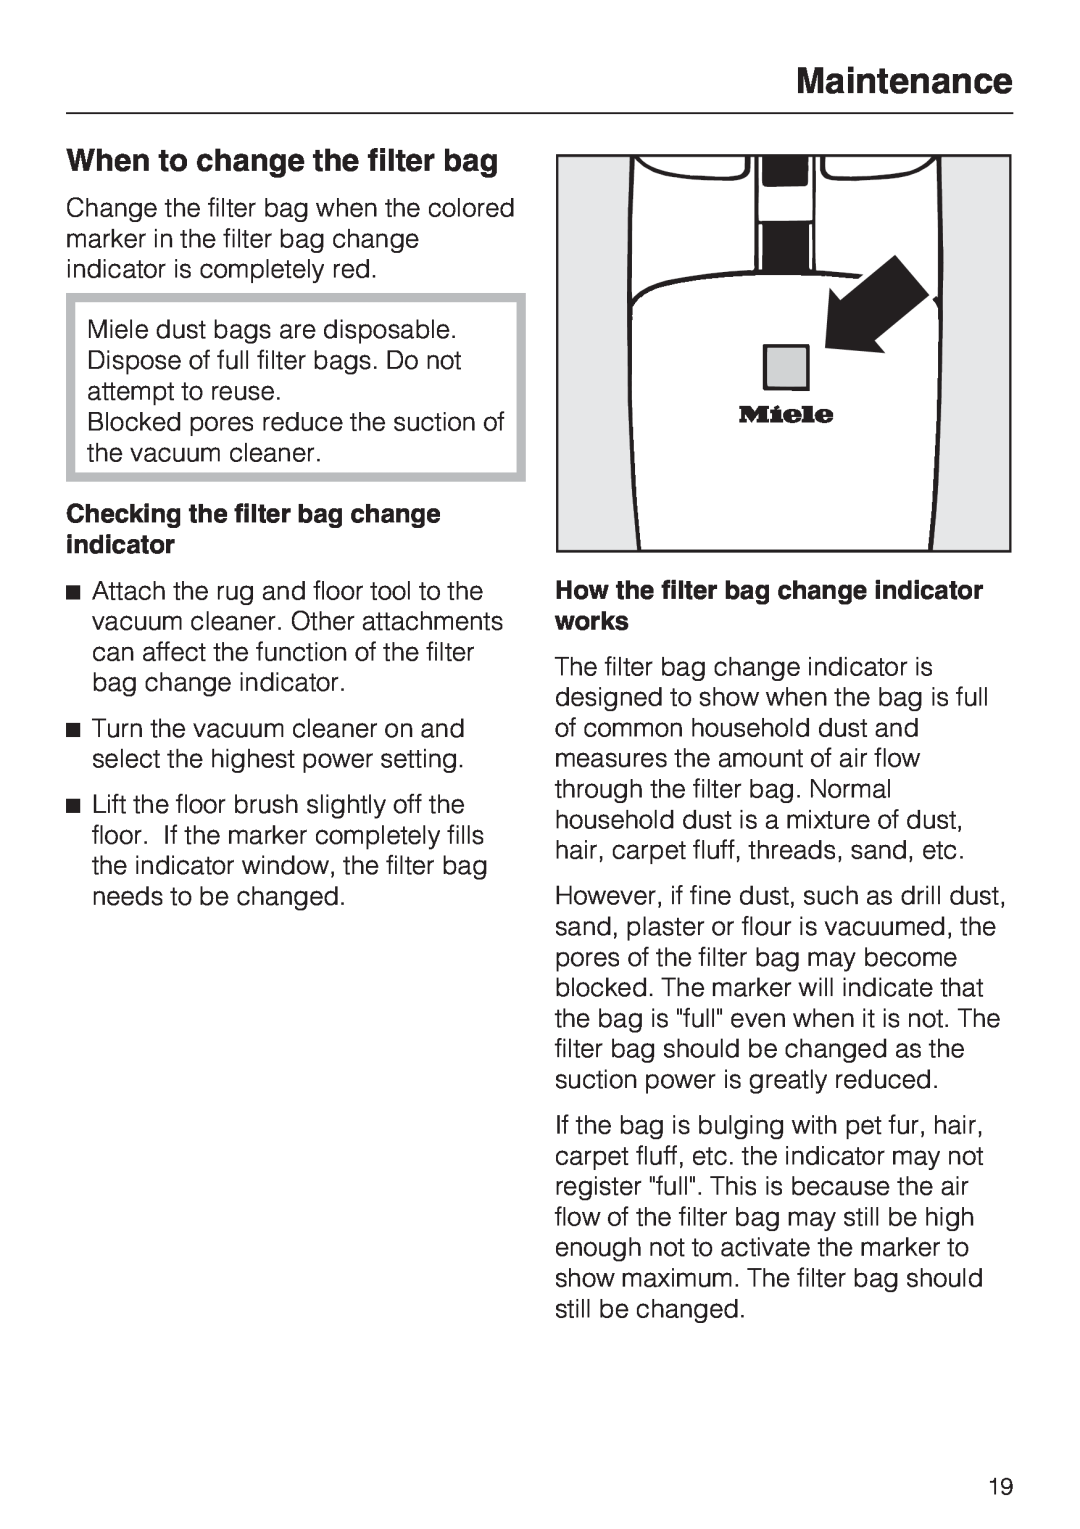 Miele S 190 operating instructions When to change the filter bag, Maintenance, Checking the filter bag change indicator 